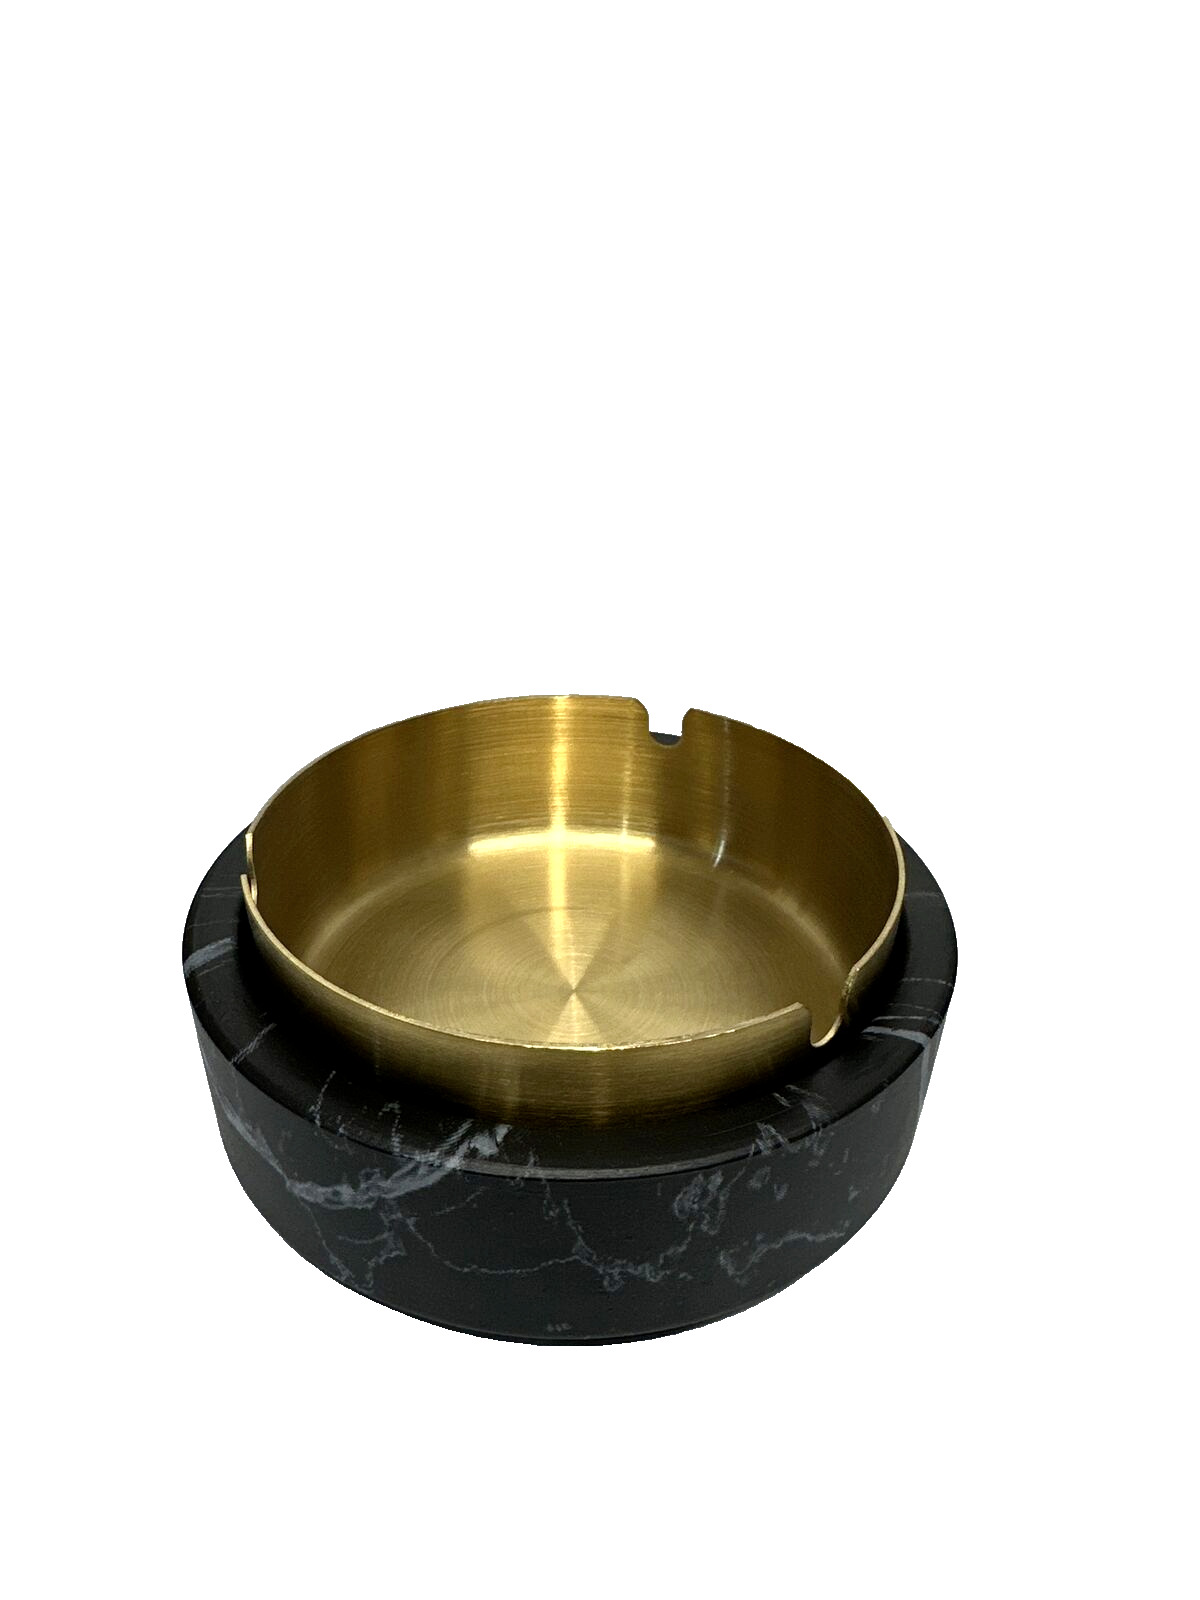 Ceramic Stainless Steel Ashtray,4.5”,Black,Gold, Brand New, Washable, Boxed,4.5”